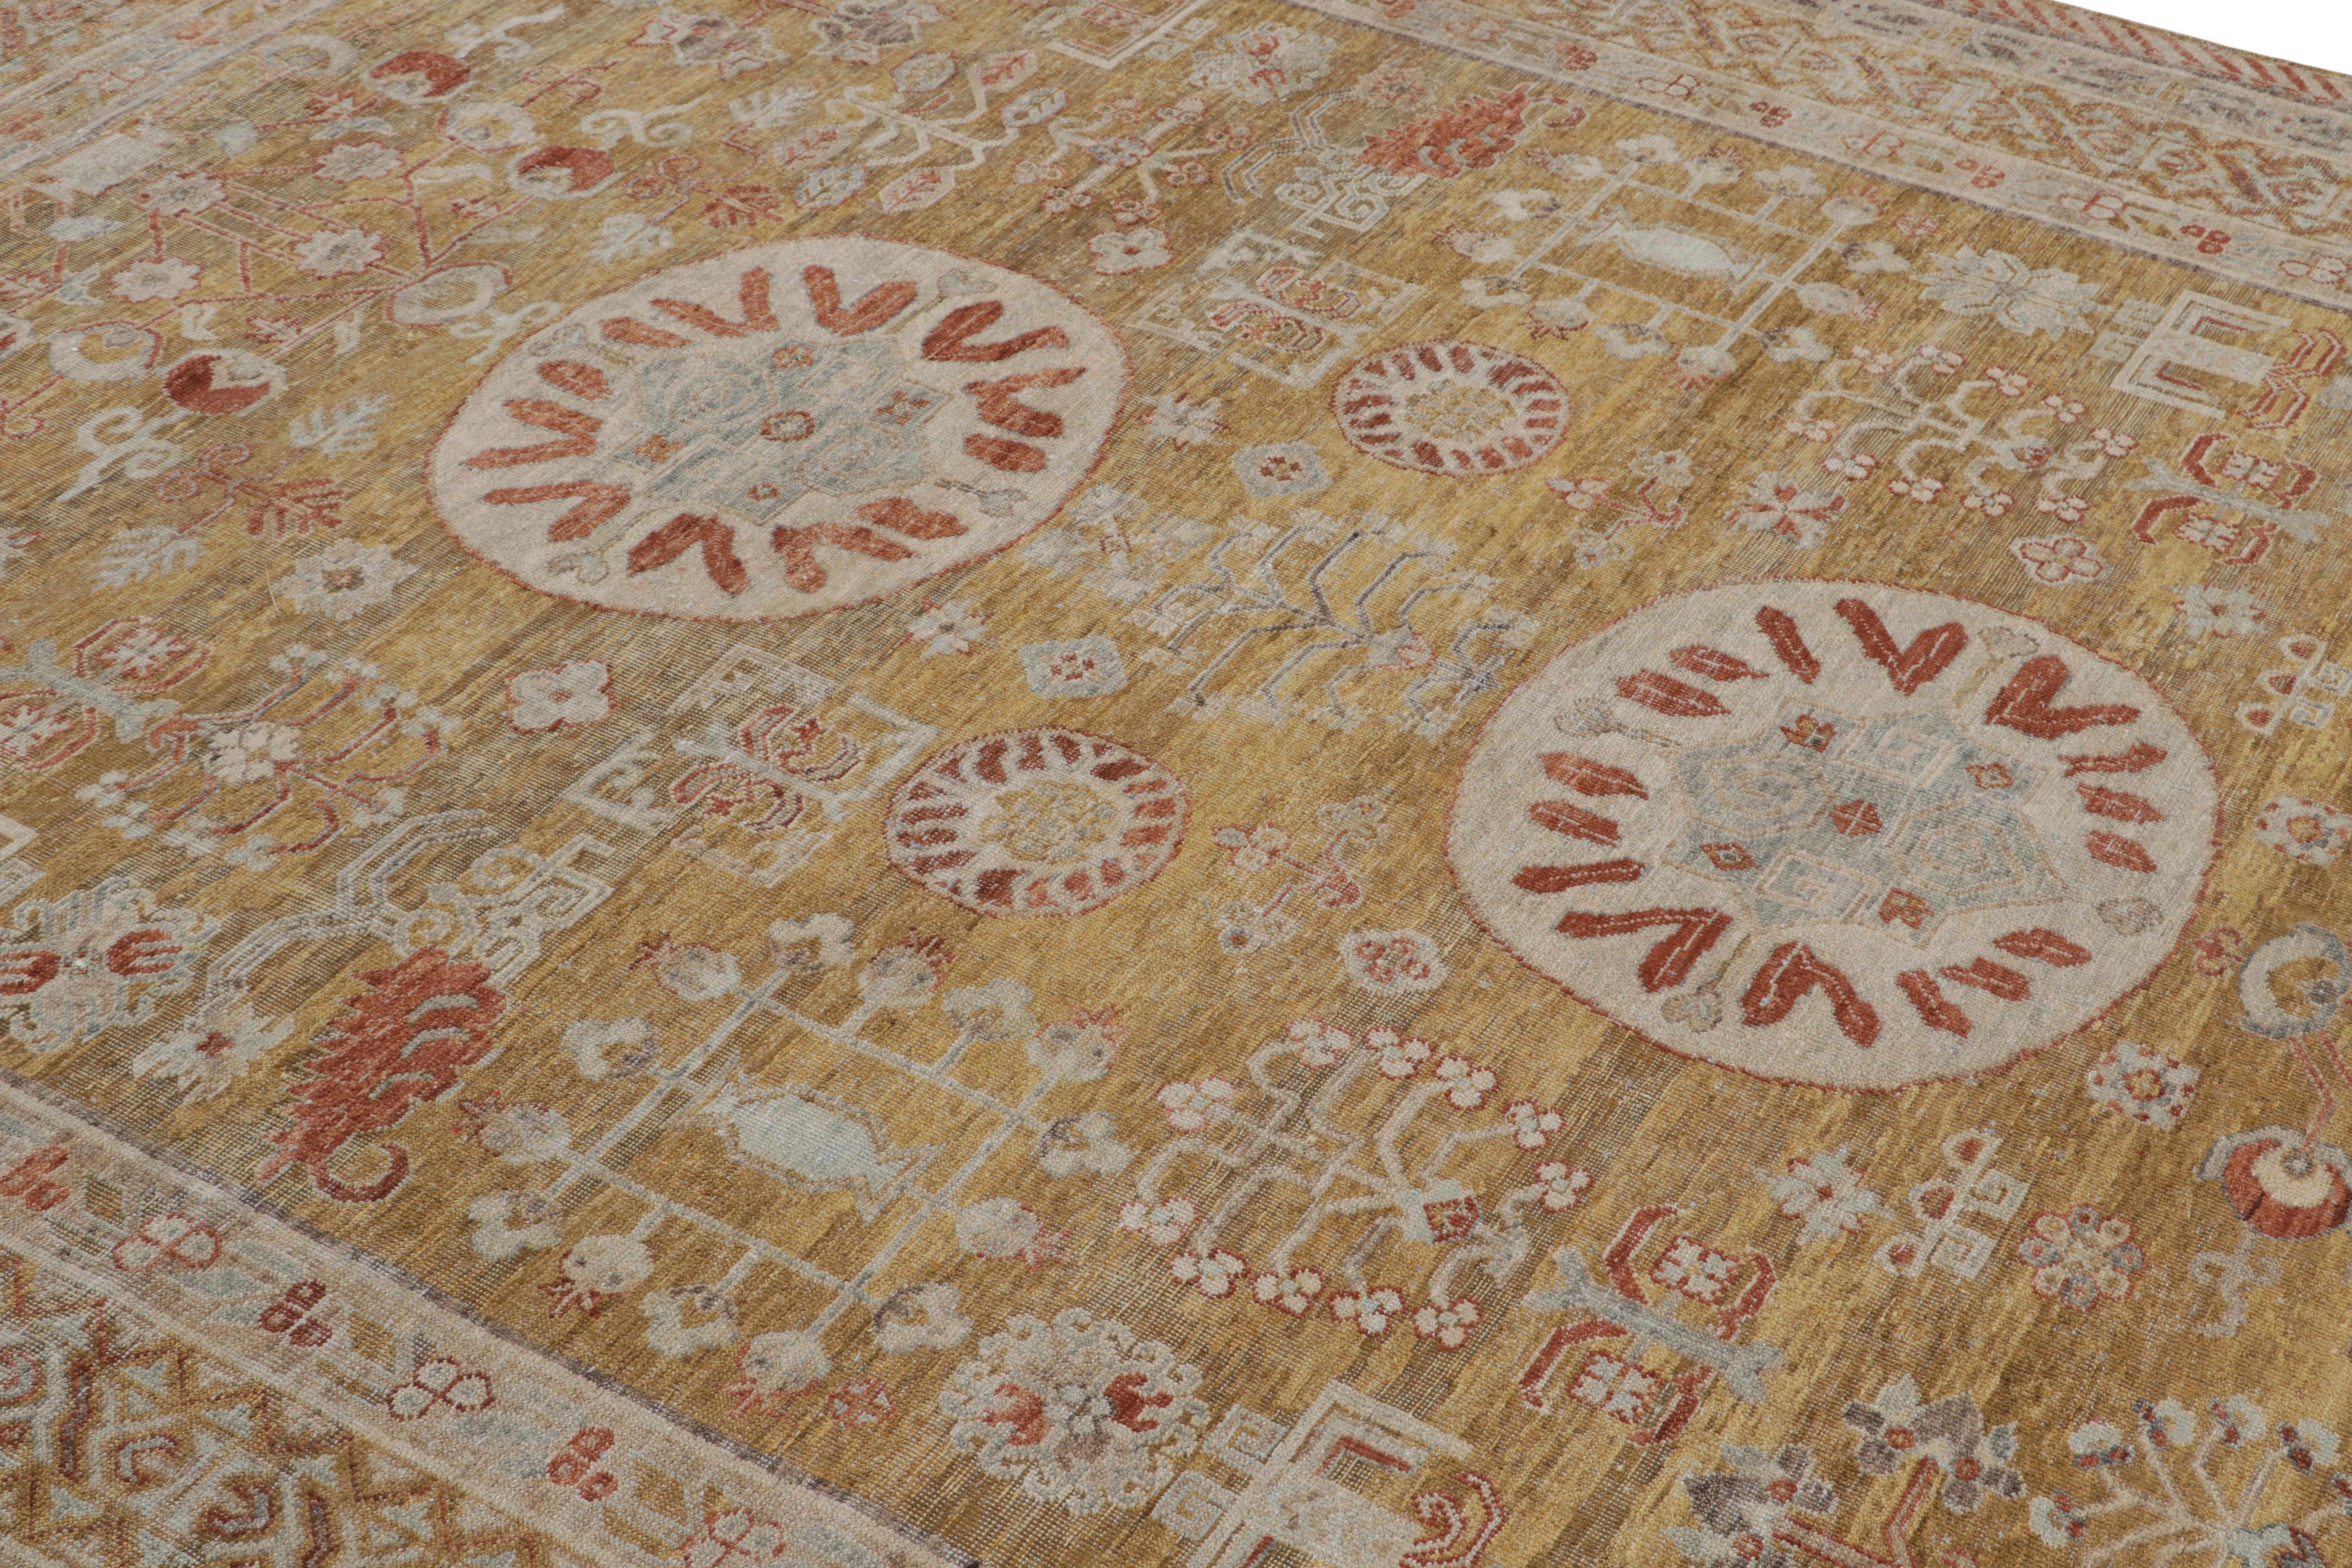 Hand-knotted in wool, this new 8x10 rug from the Modern Classics Collection by Rug & Kilim is inspired by antique Khotan rugs.

On the Design:

The rug carries a gold field and rust red border, underscoring a play of medallion and all over style